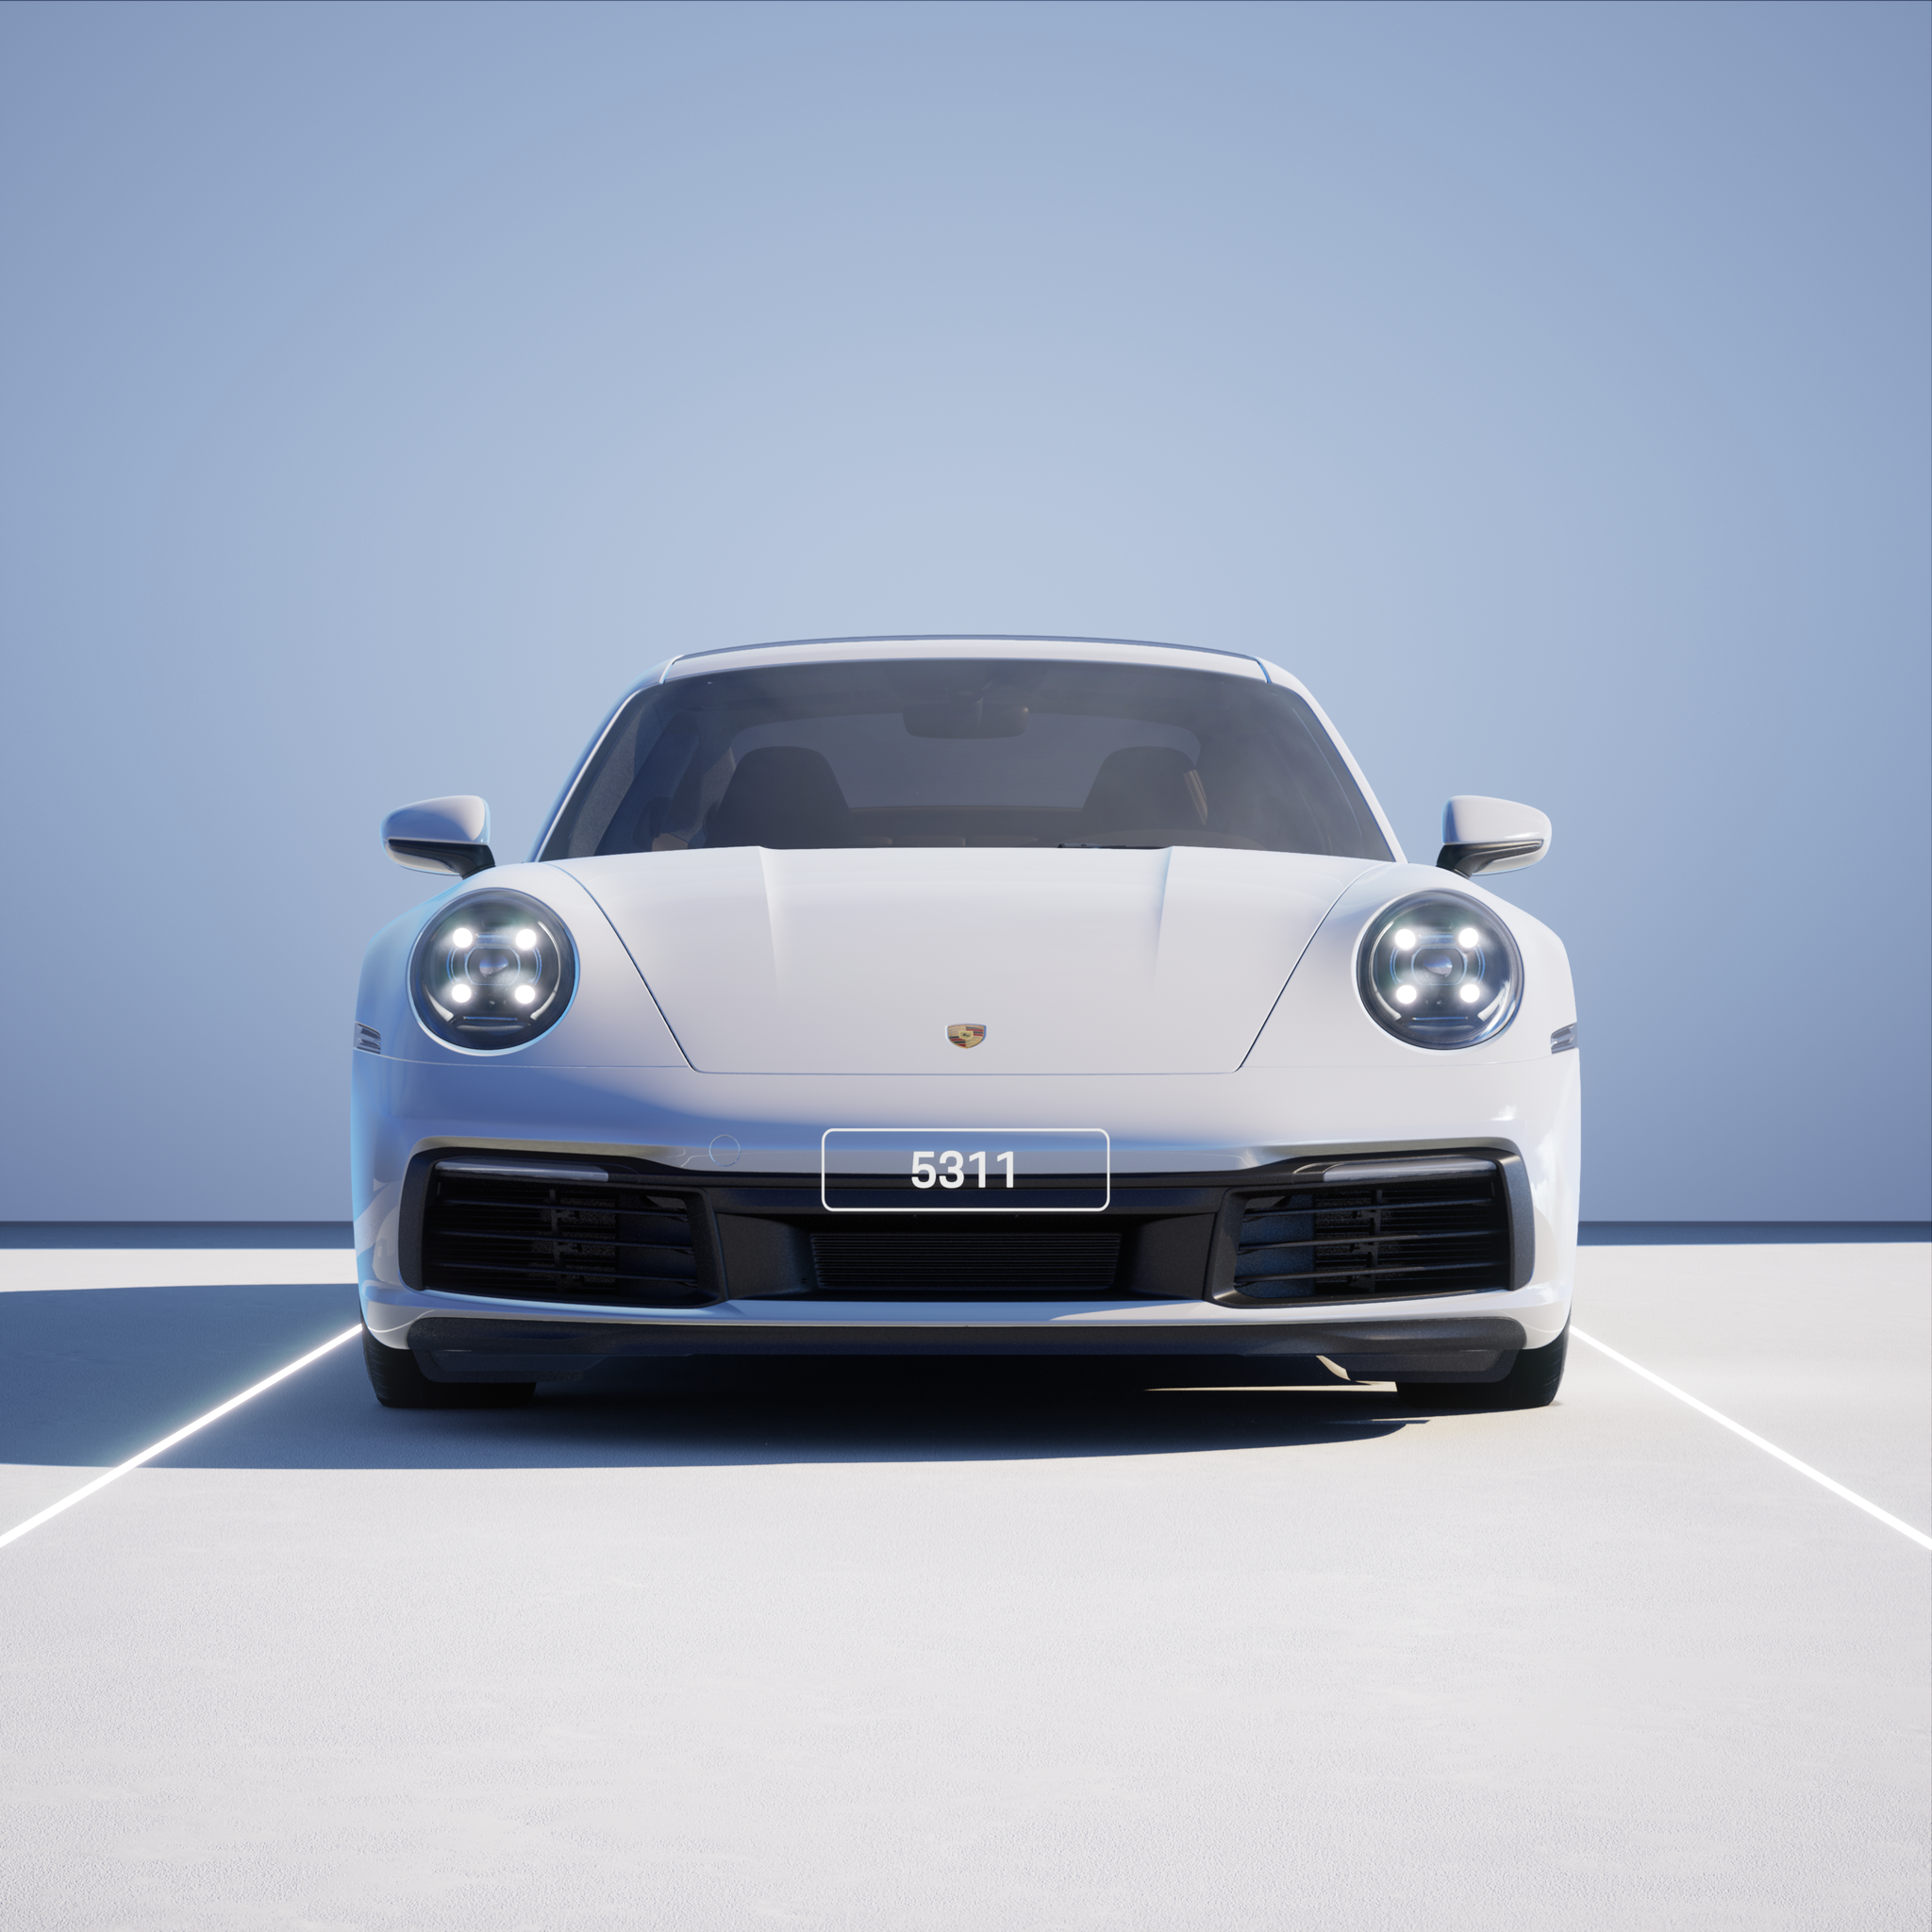 The PORSCHΞ 911 5311 image in phase